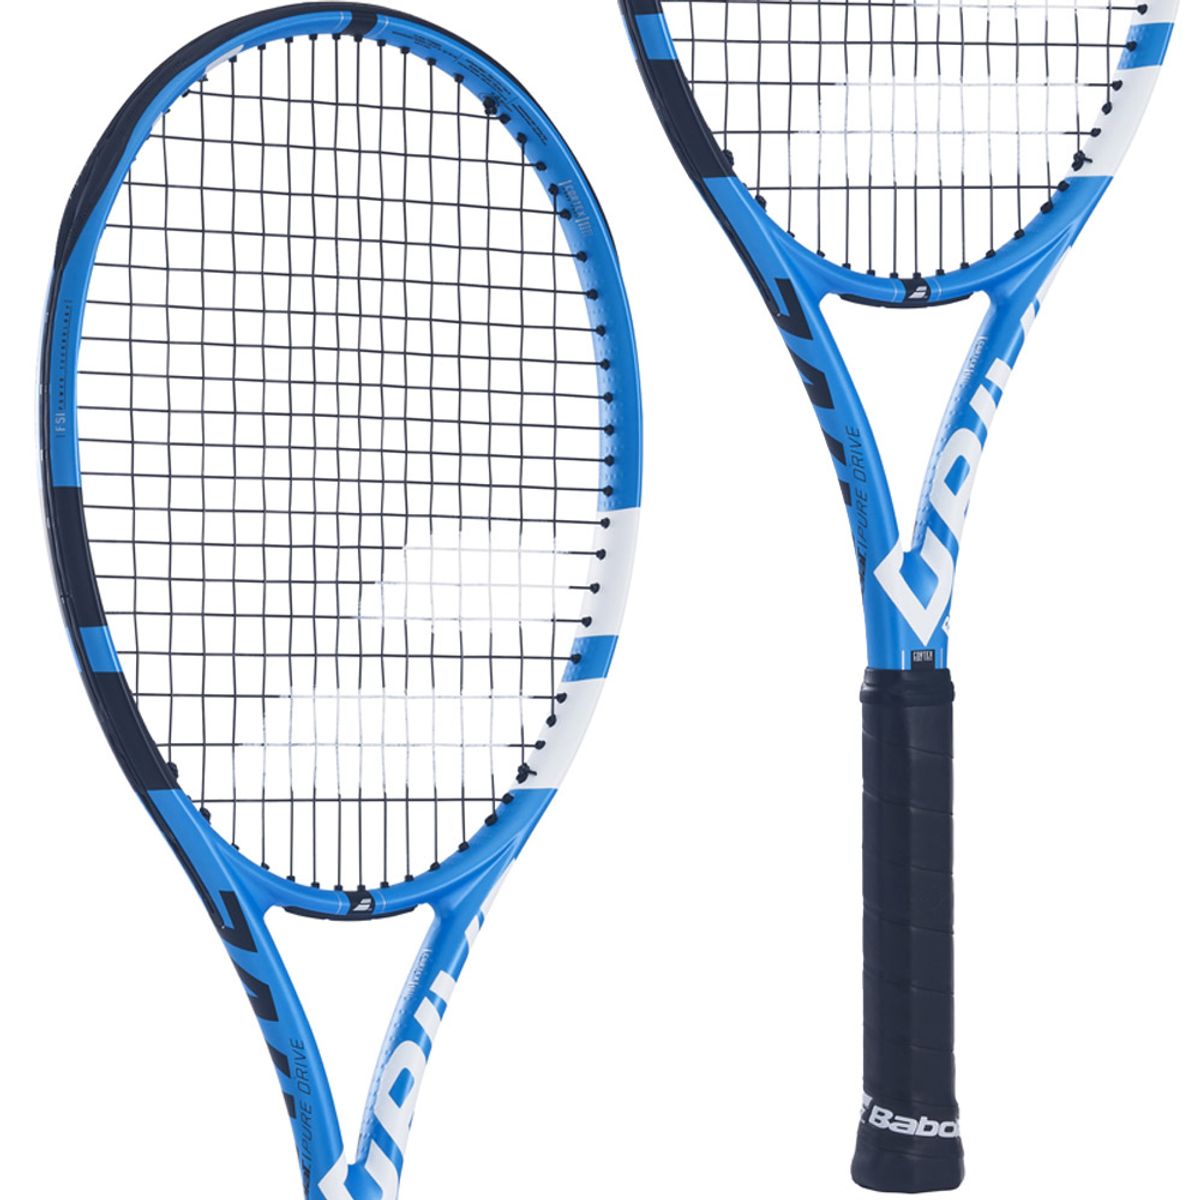 NEW ARRIVAL: Babolat Pure Drive 2018 Tennis Racquet